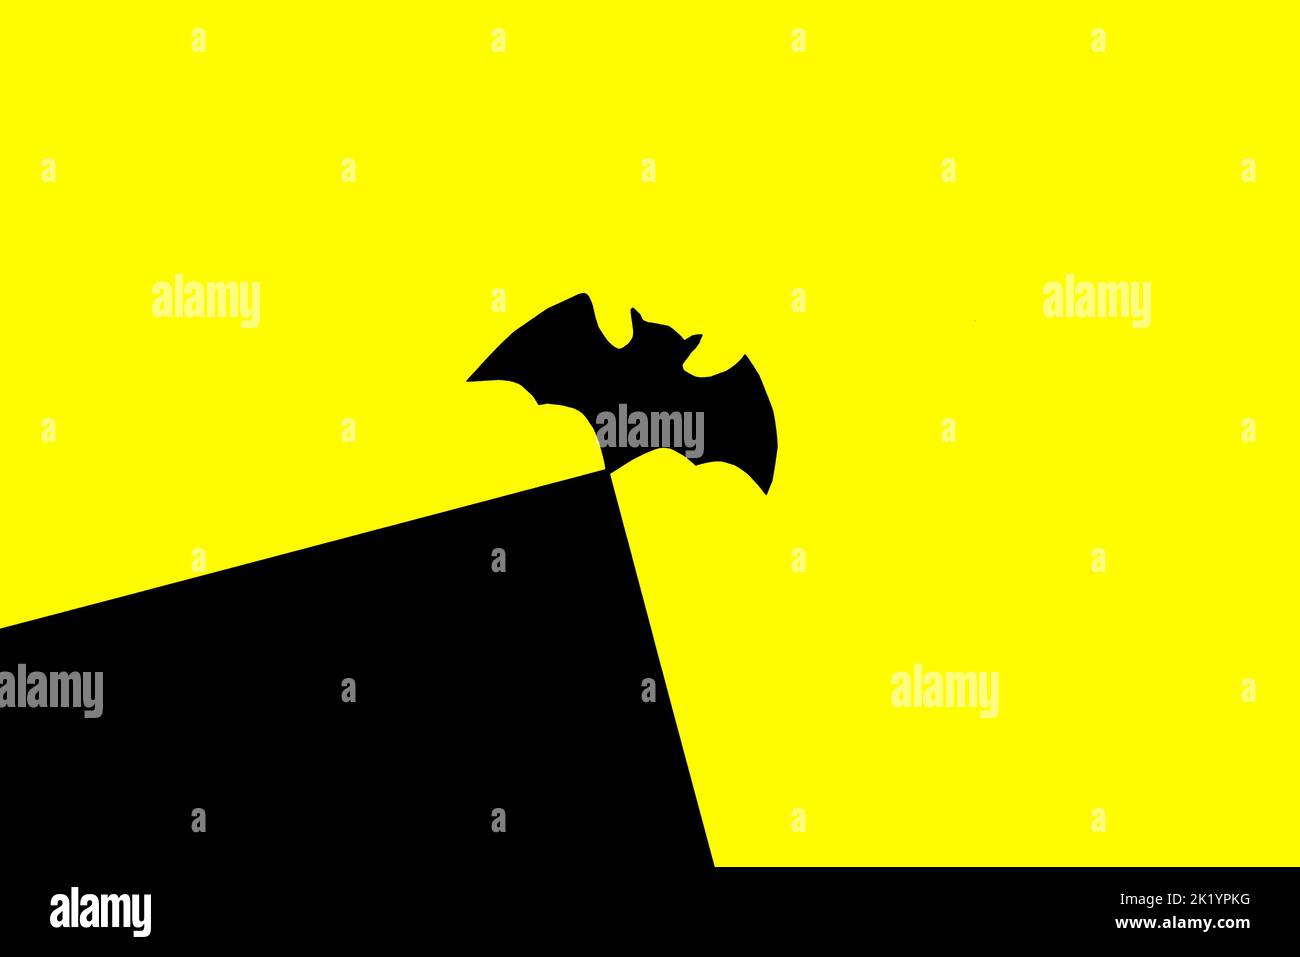 black bat on top of black part of black and yellow background, halloween concept, creative art design, paper craft Stock Photo